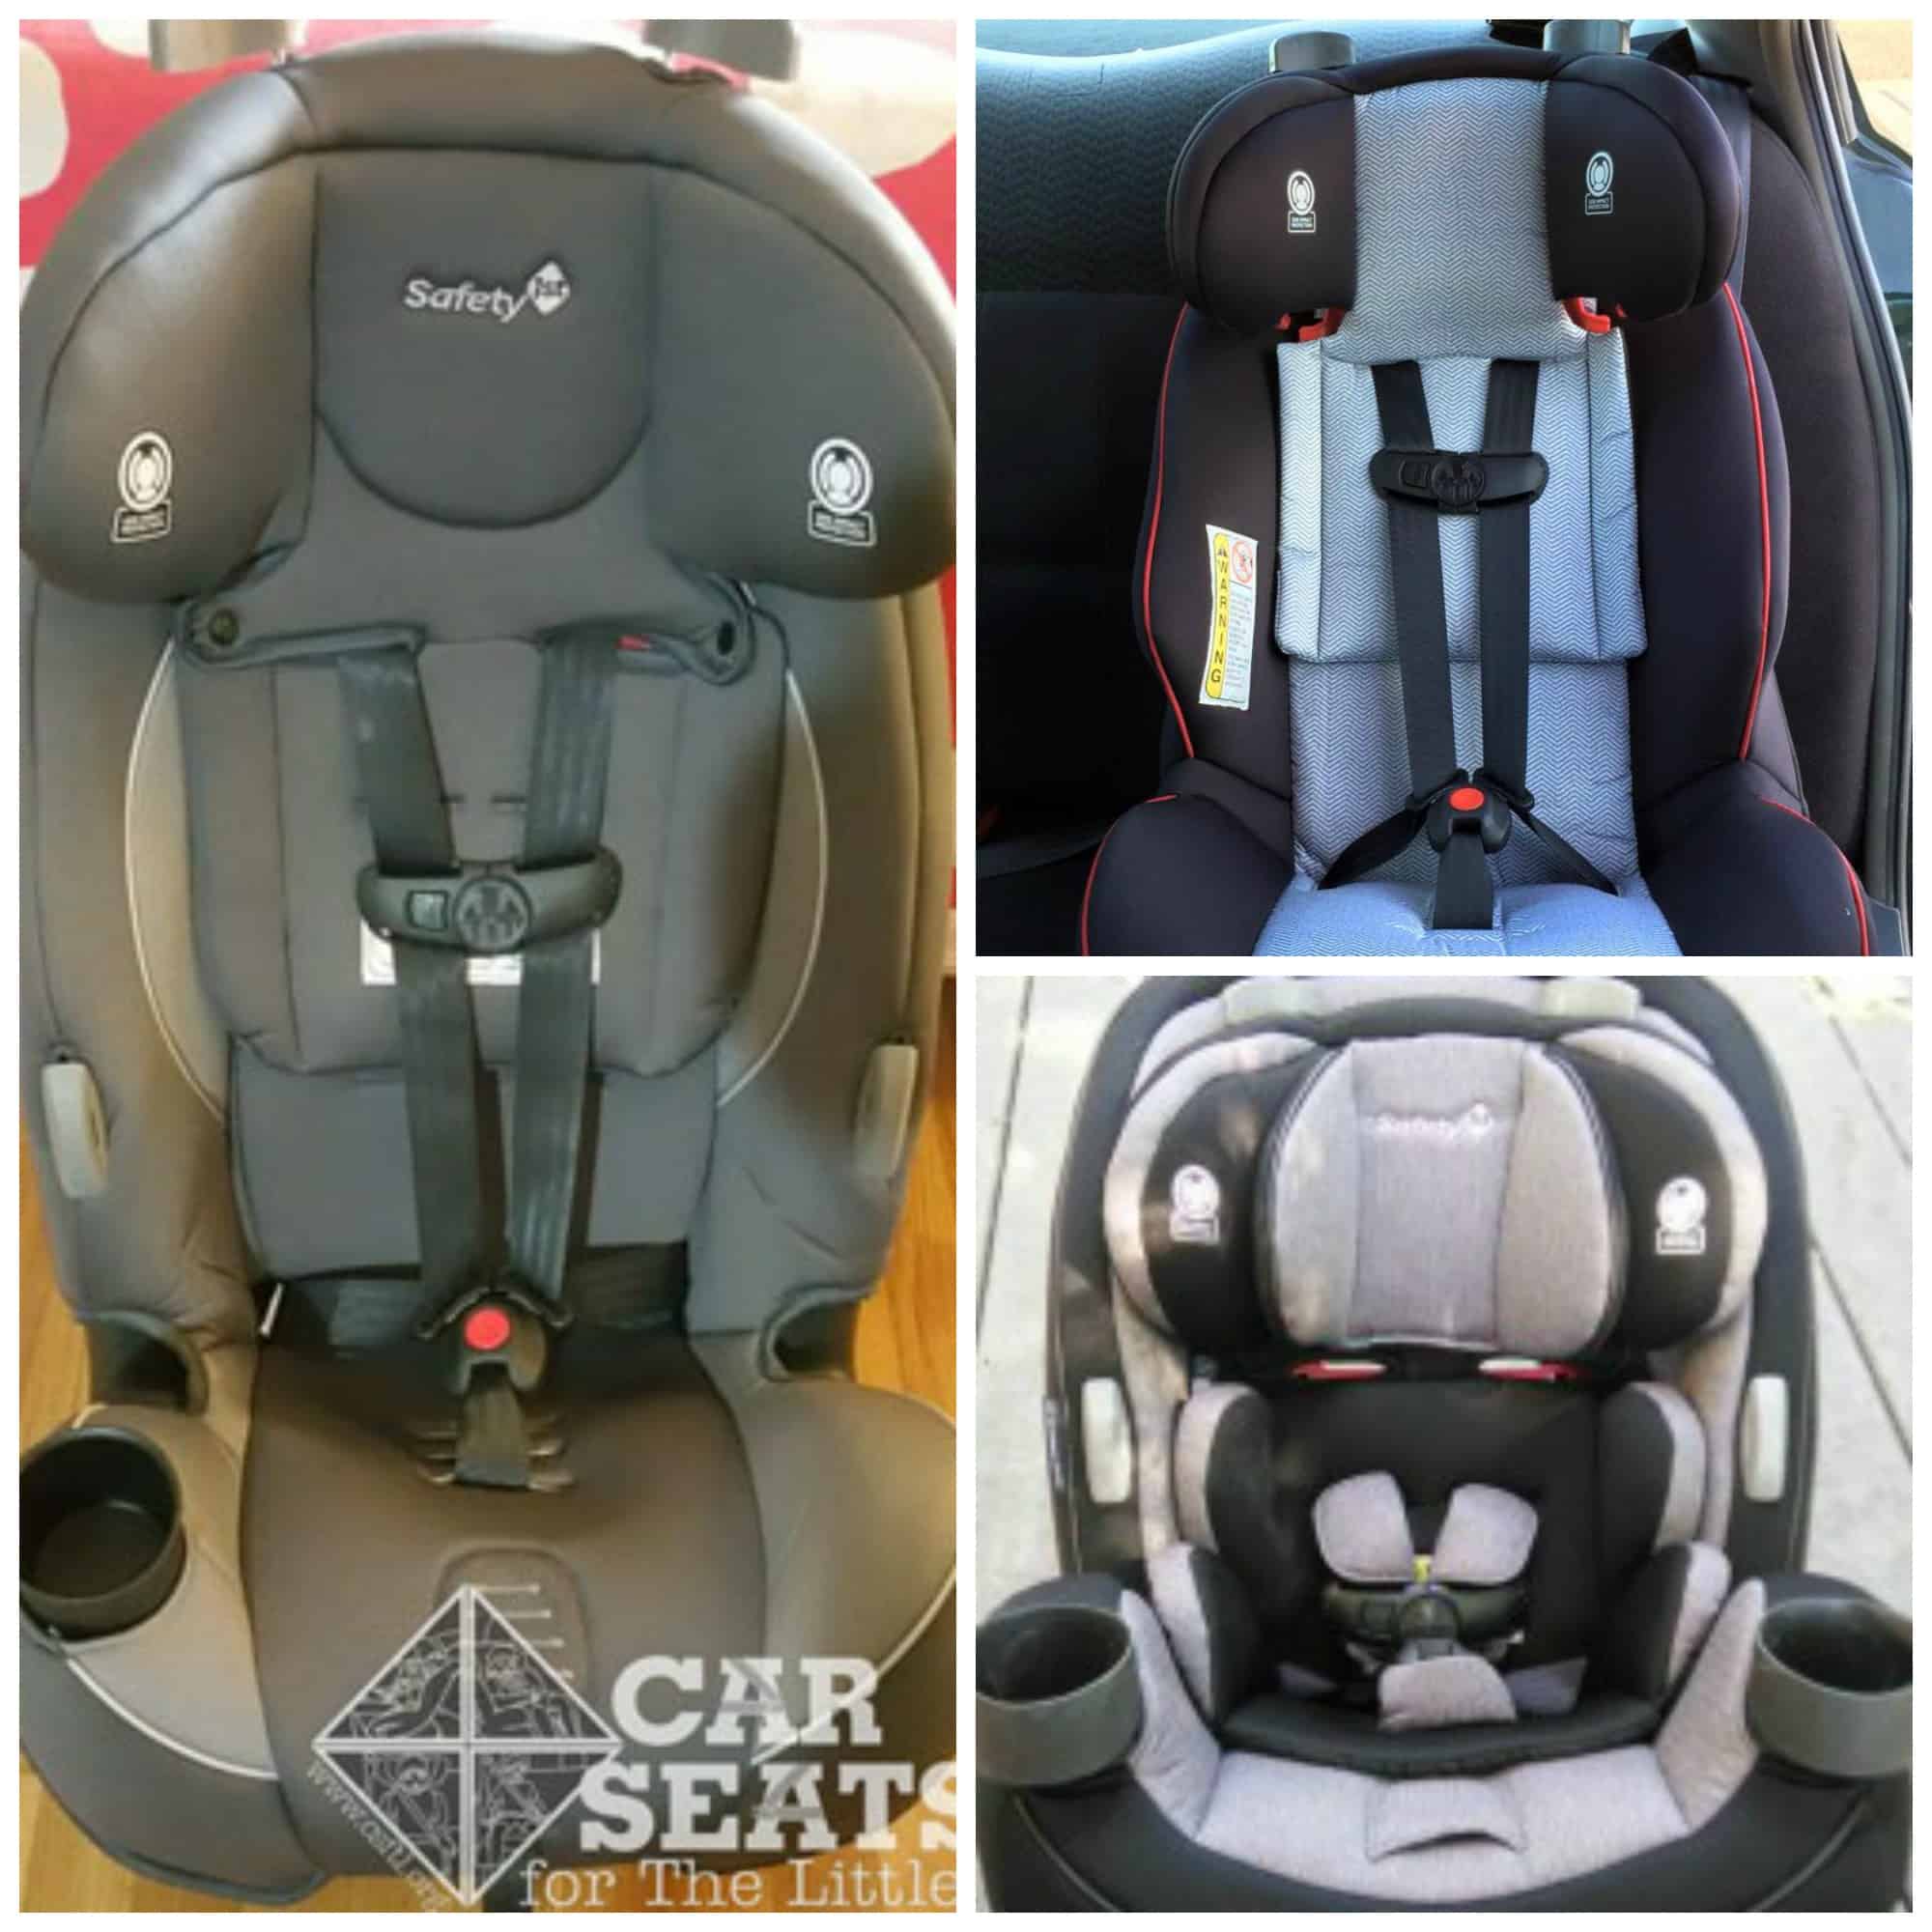 Cosco/Safety 1st Convertible Car Seat Comparison Chart - Car Seats For